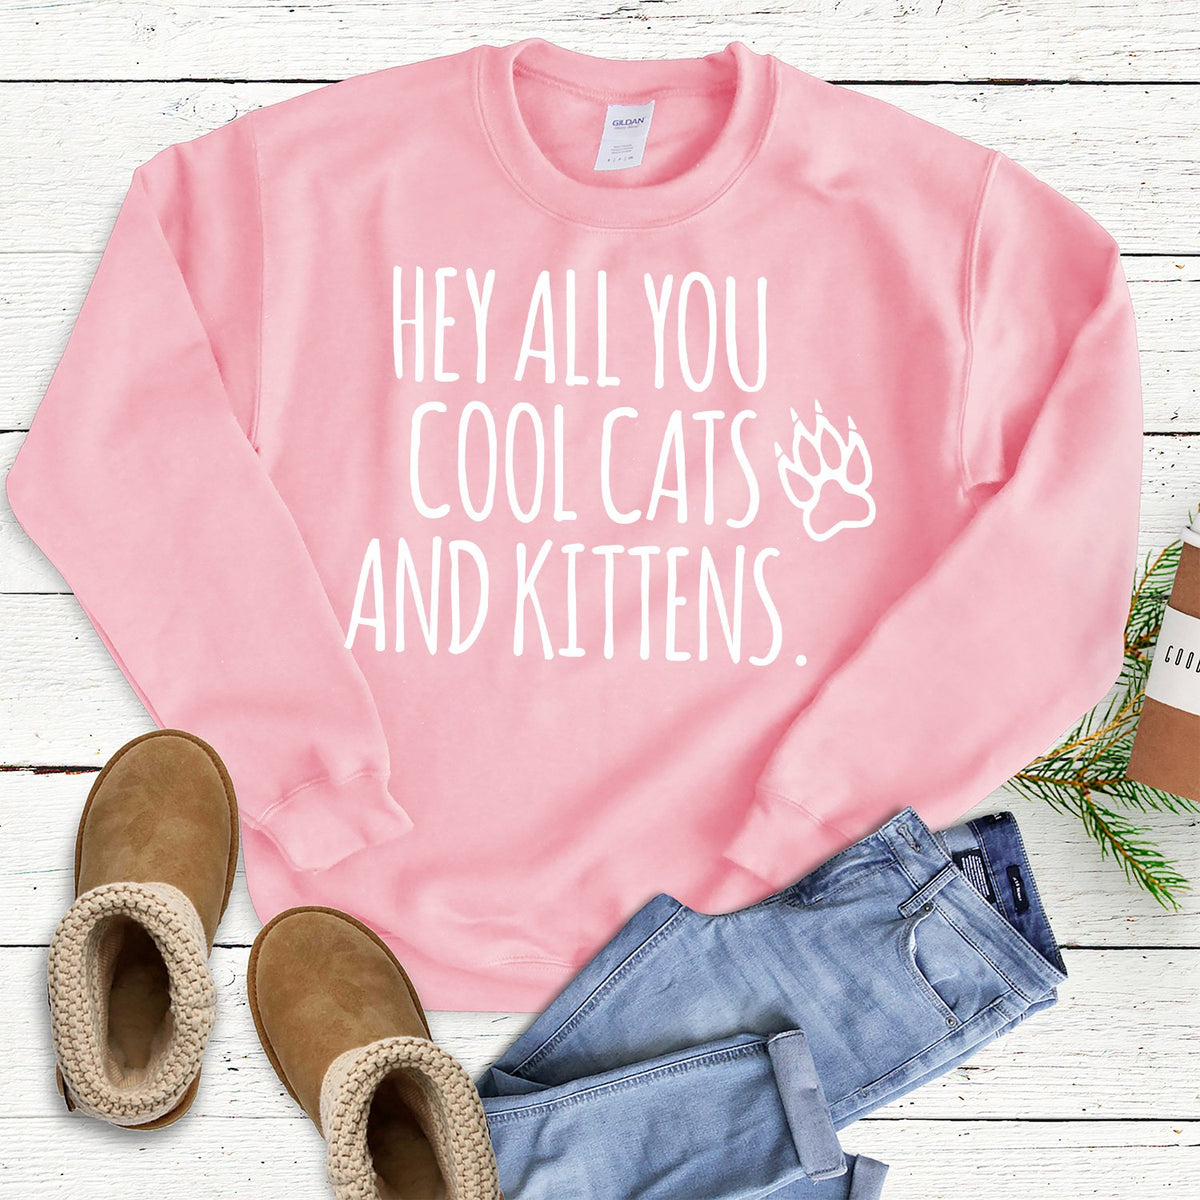 Hey All You Cool Cats and Kittens - Long Sleeve Heavy Crewneck Sweatshirt